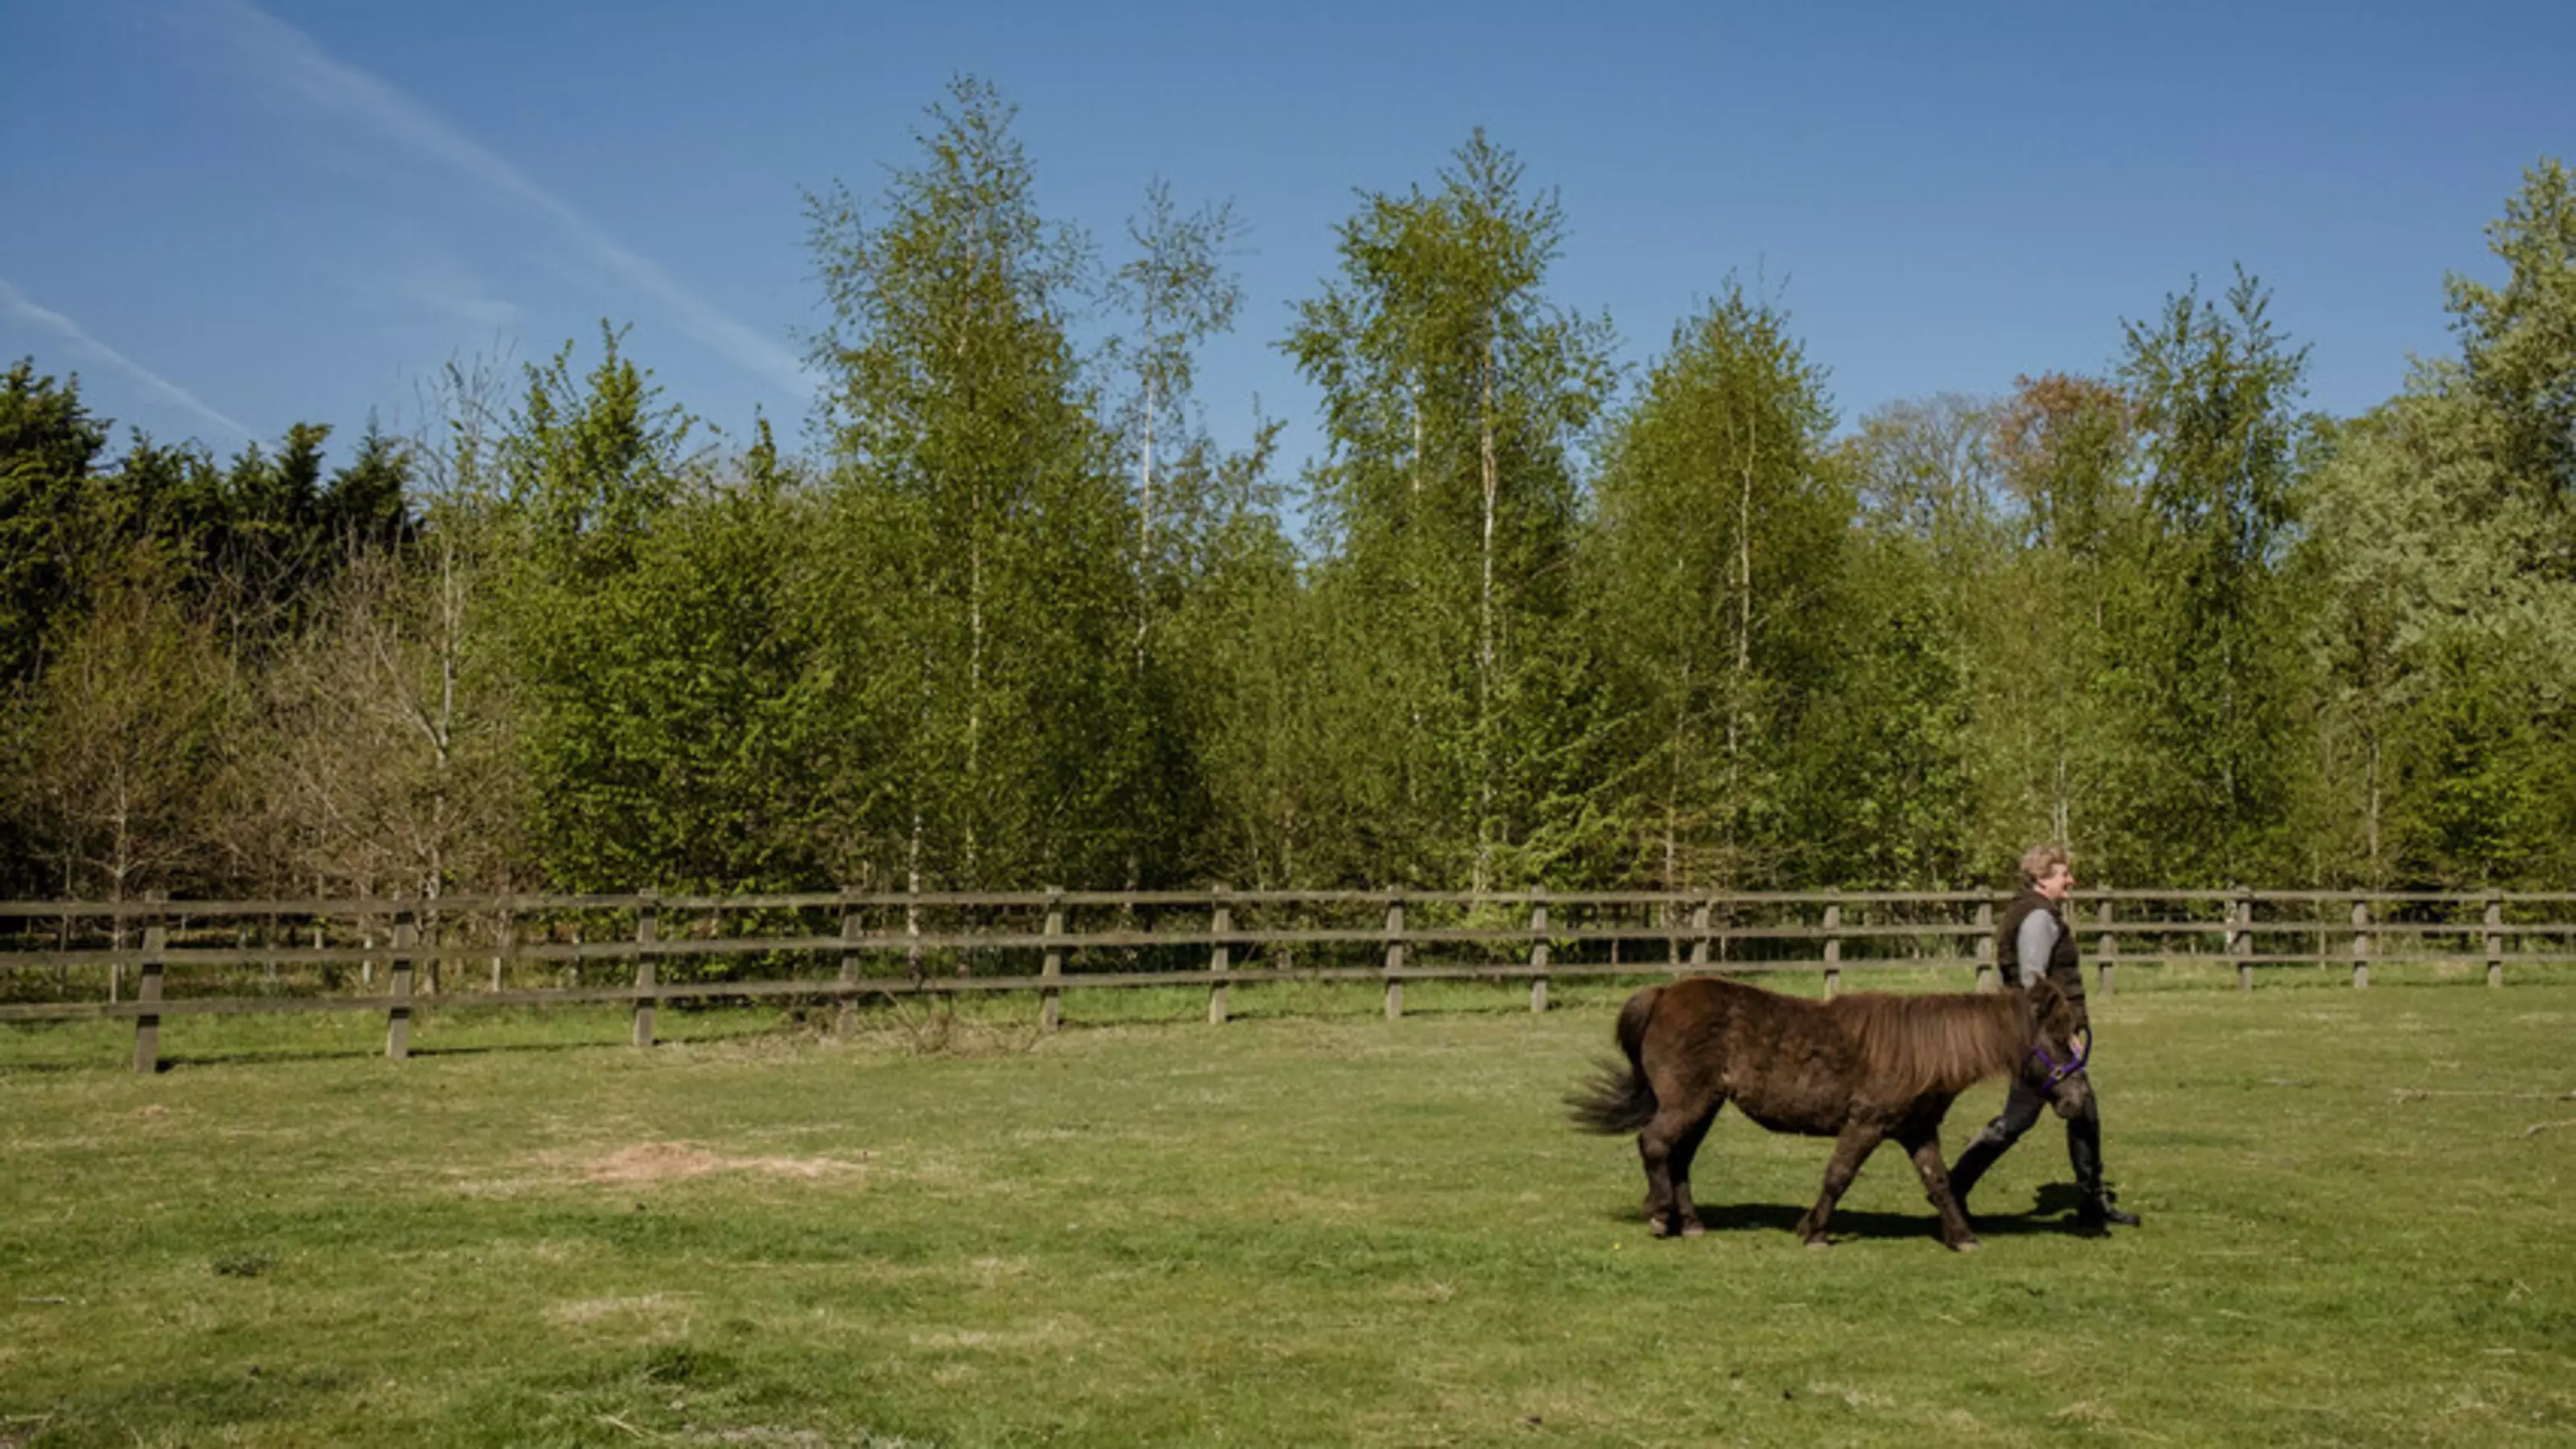 Bay Shetland pony walking in a field with her owner and trees in the background